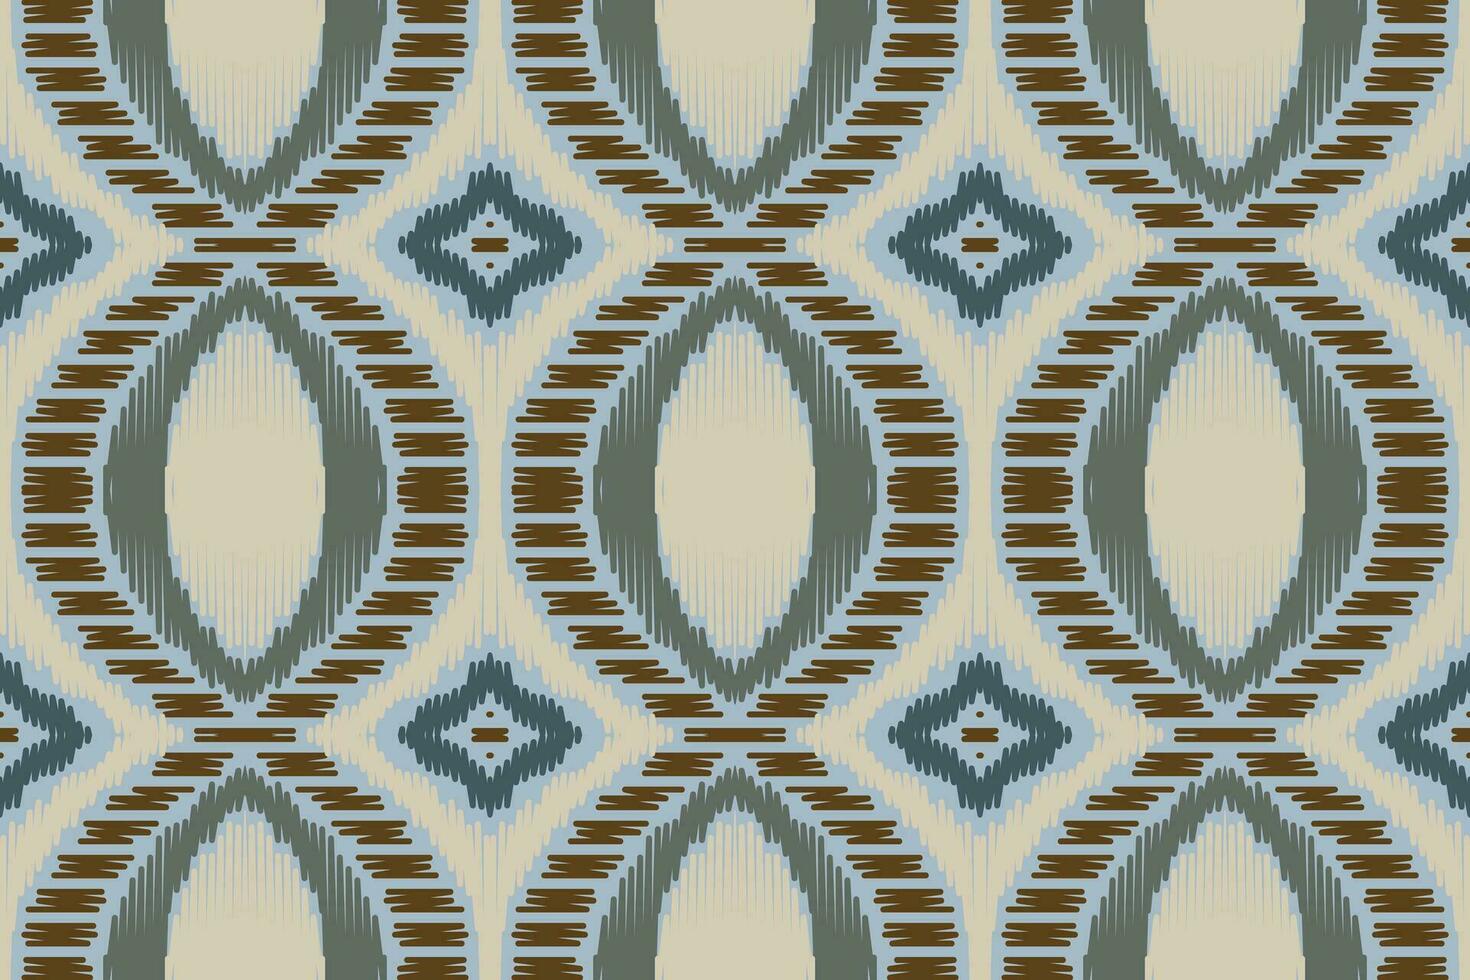 Ikat Damask Embroidery Background. Ikat Stripe Geometric Ethnic Oriental Pattern traditional.aztec Style Abstract Vector illustration.design for Texture,fabric,clothing,wrapping,sarong.